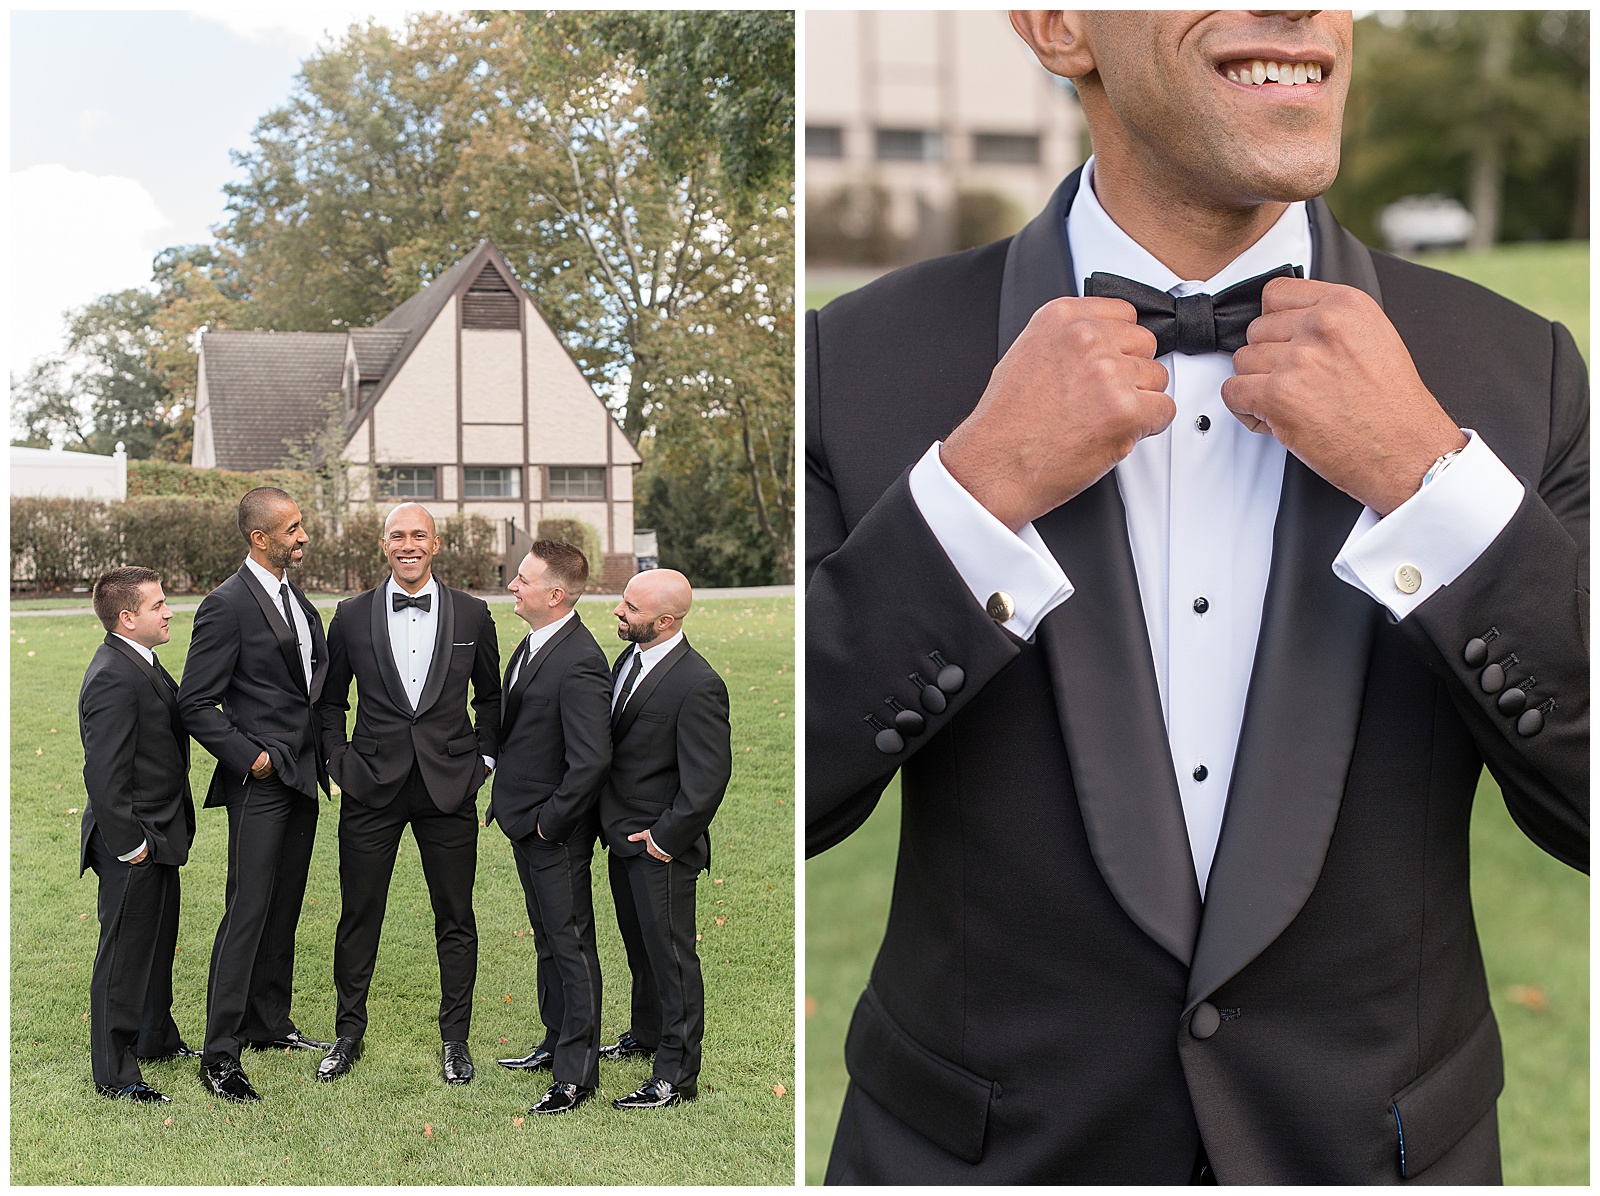 groom with his groomsmen and they all have their hands in their pockets standing on grass lawn with house in background